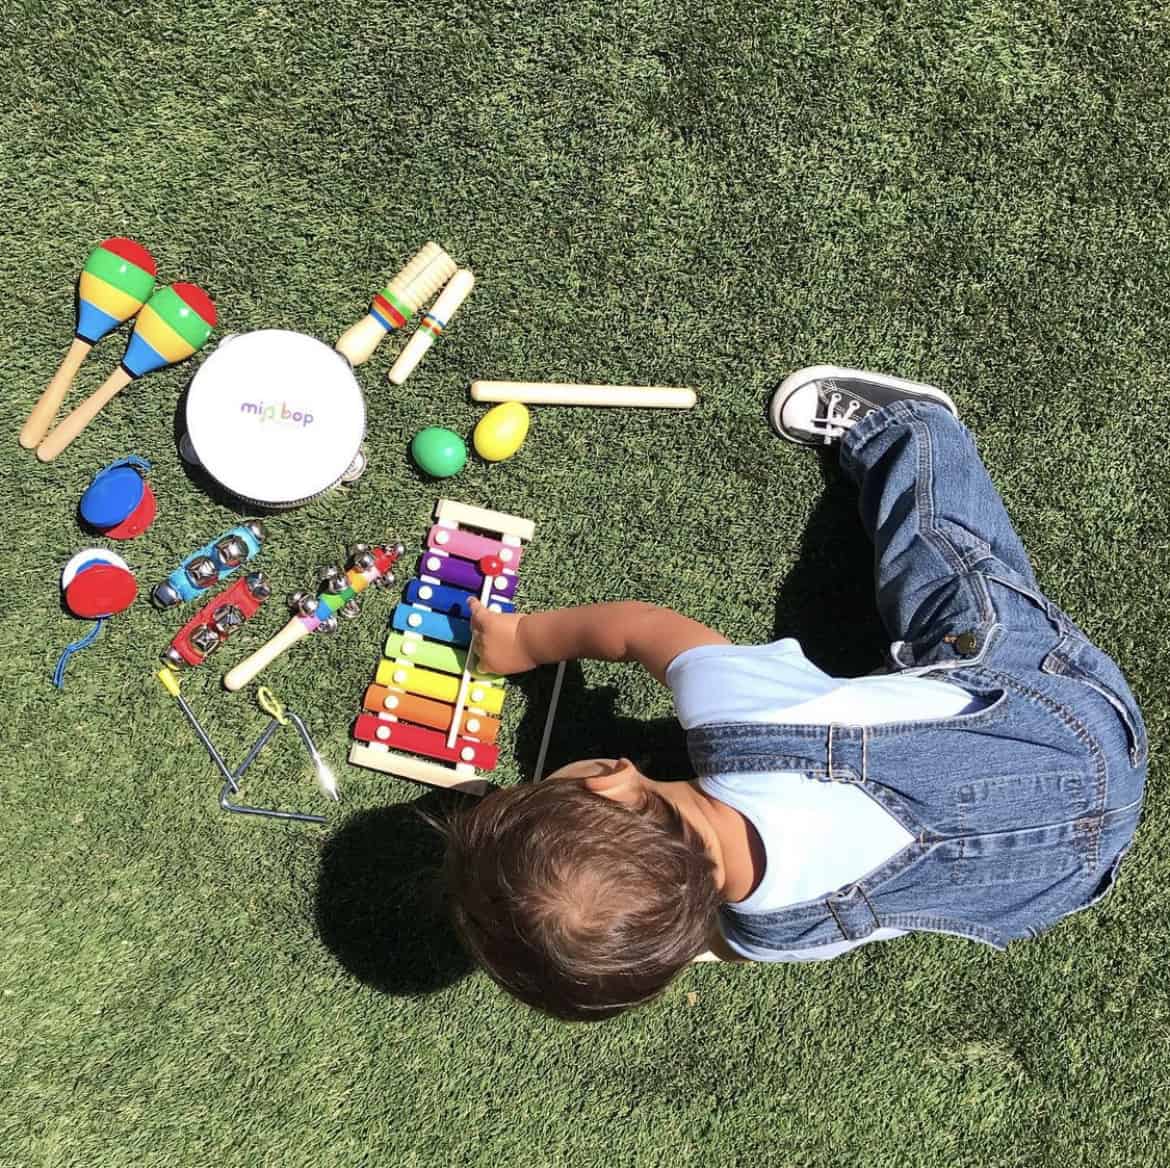 Child sitting on grass playing with instruments